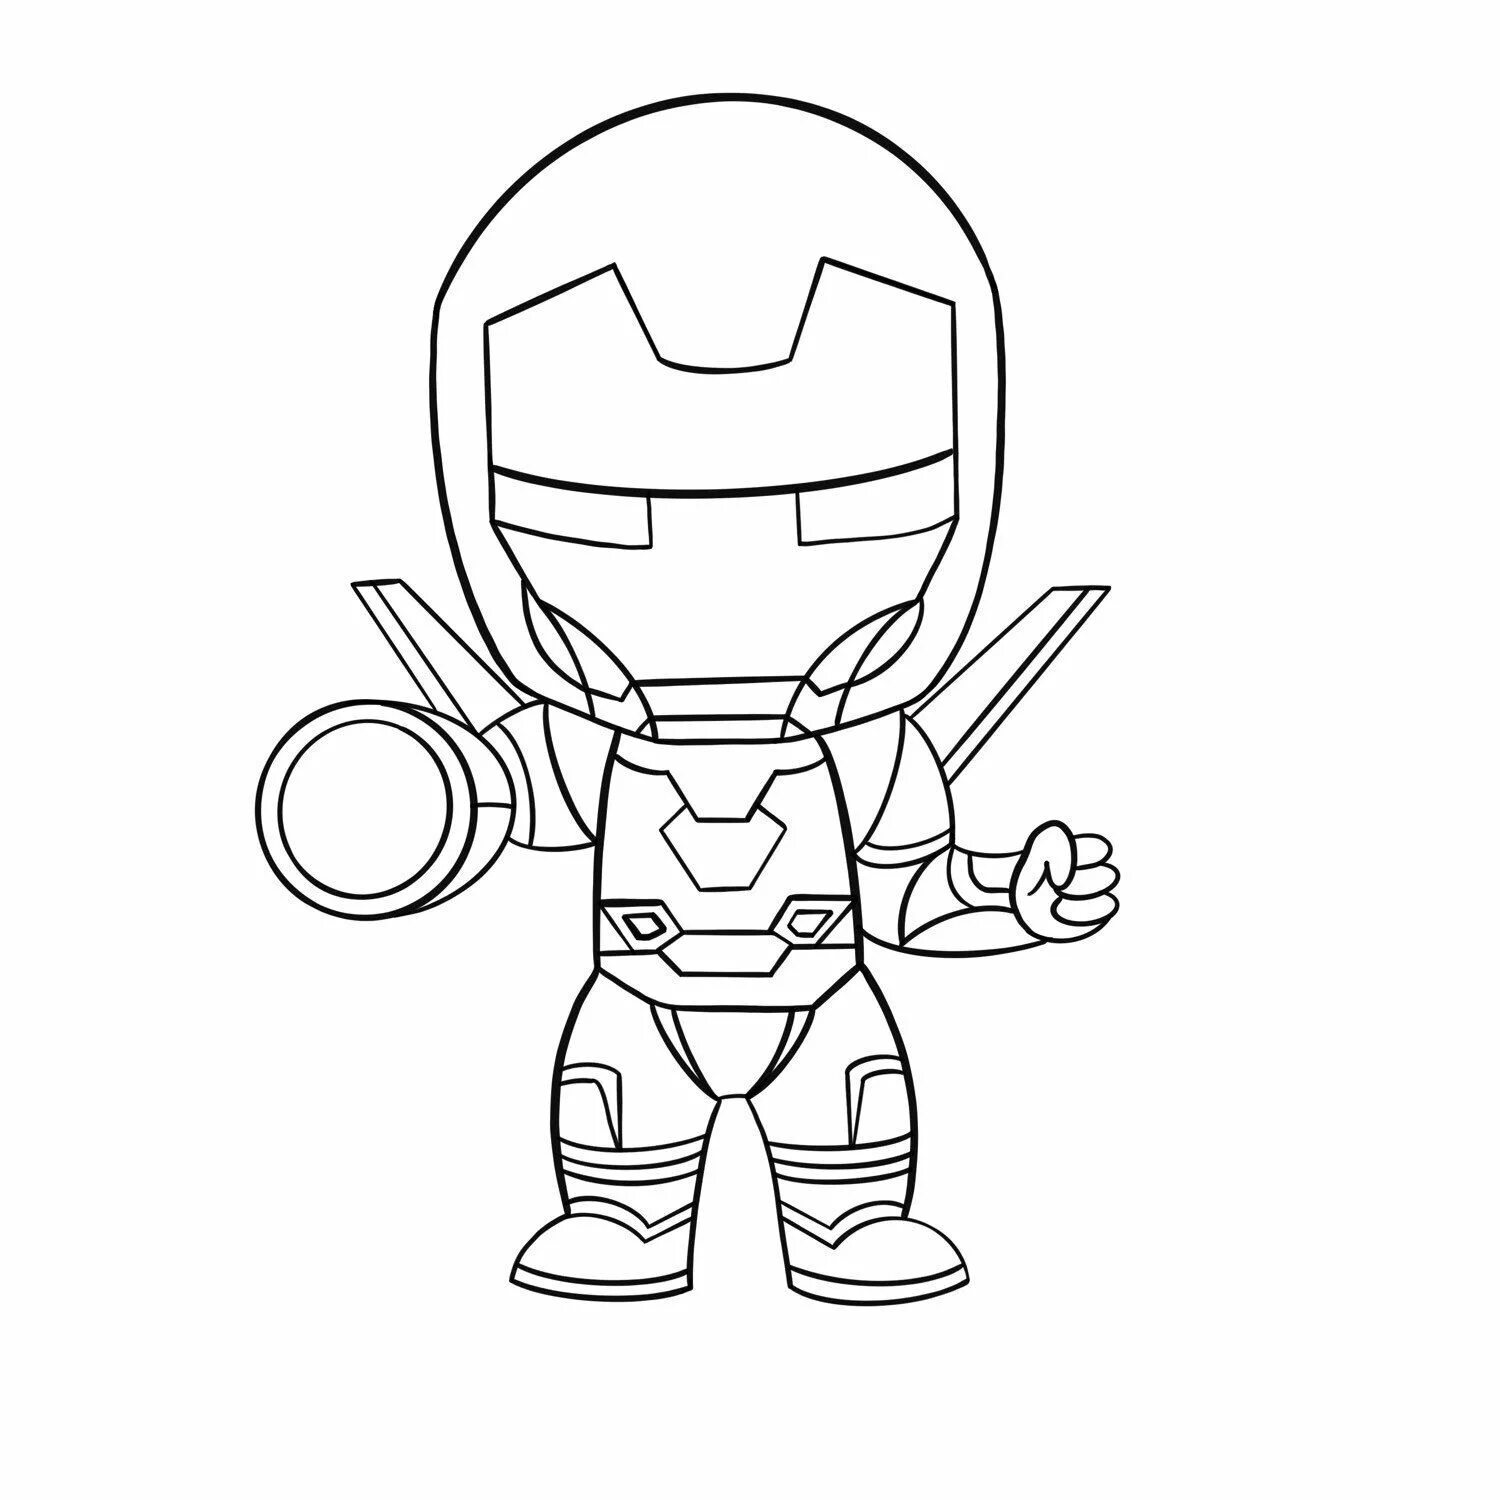 Commendable marvel iron man coloring page